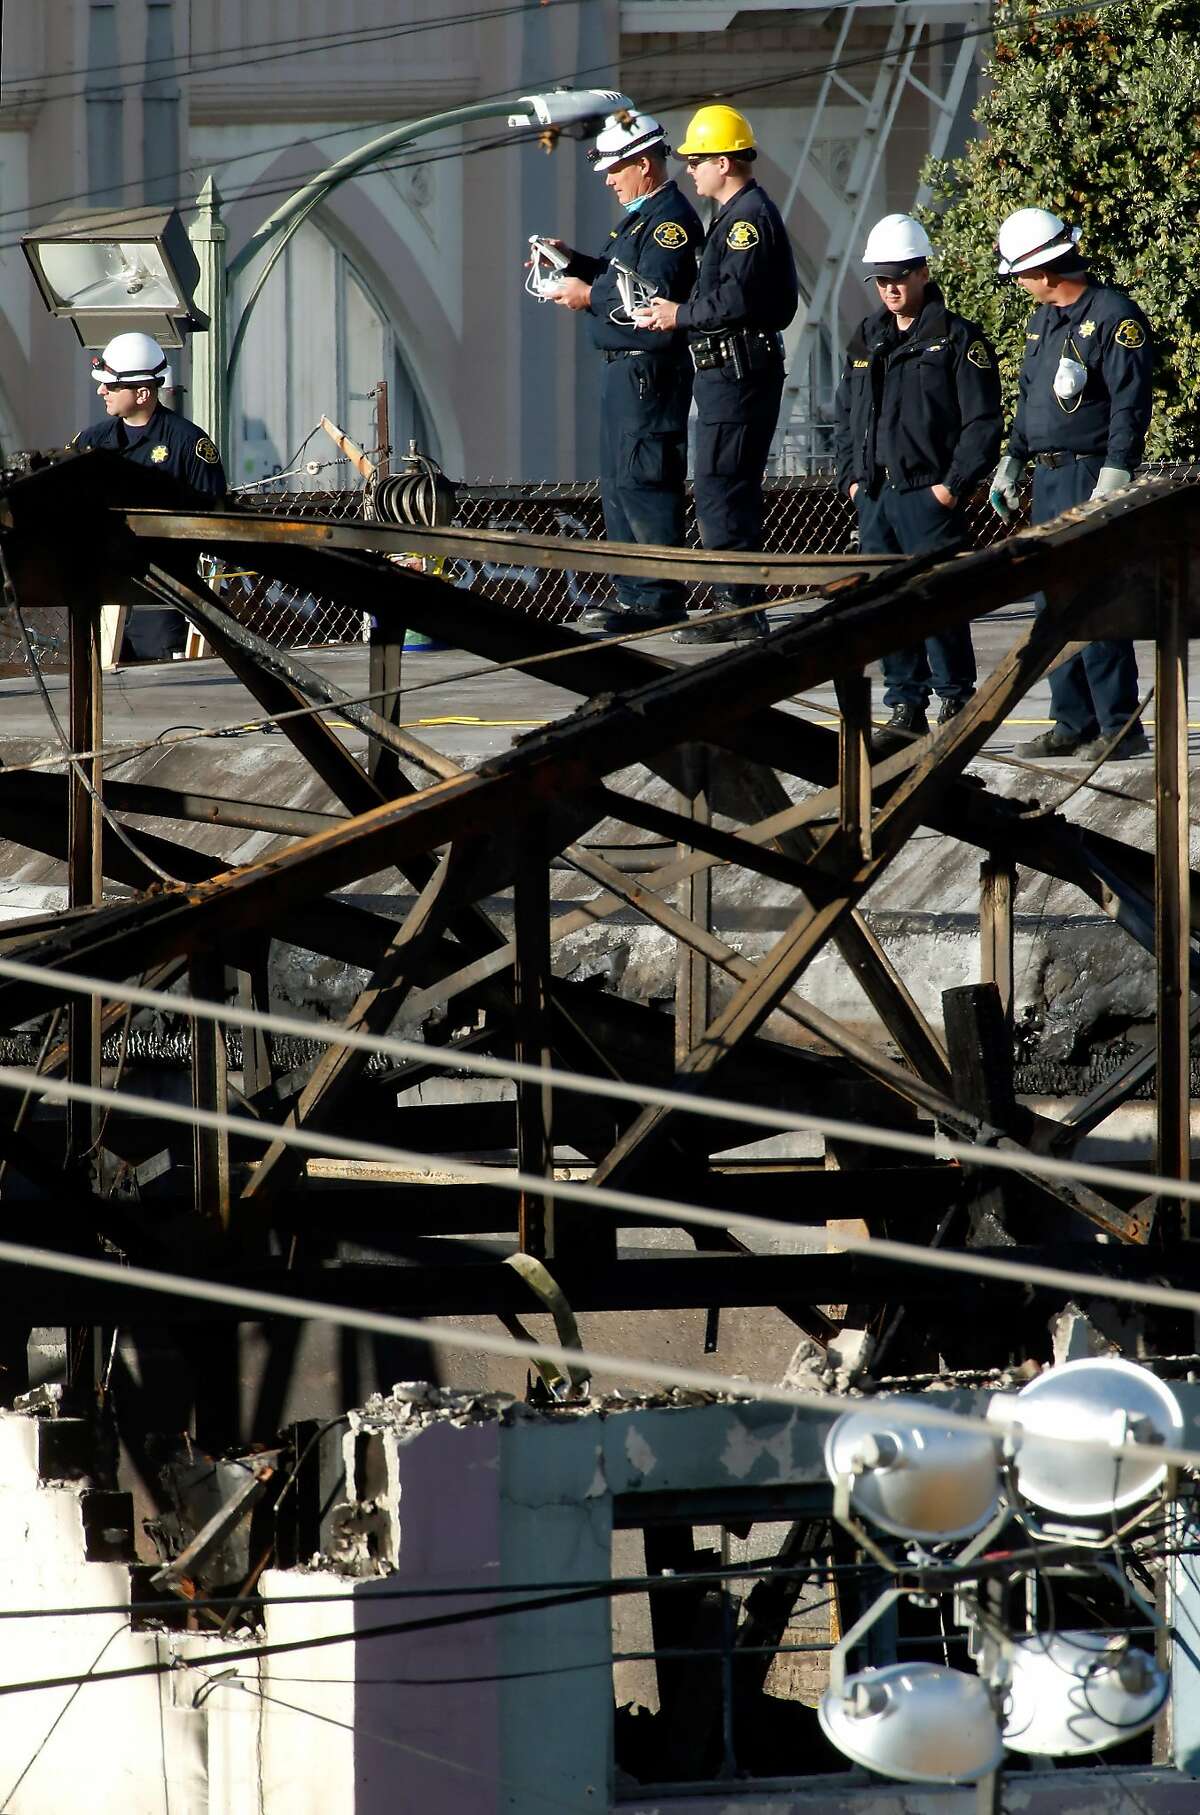 Alameda County Sherrif's officers keep an eye on a quadcopter that they used to look into the destroyed Ghost Ship warehouse as recovery efforts came to a close following the fire that claimed 36 lives in Oakland, Calif., on Tuesday, December 6, 2016.